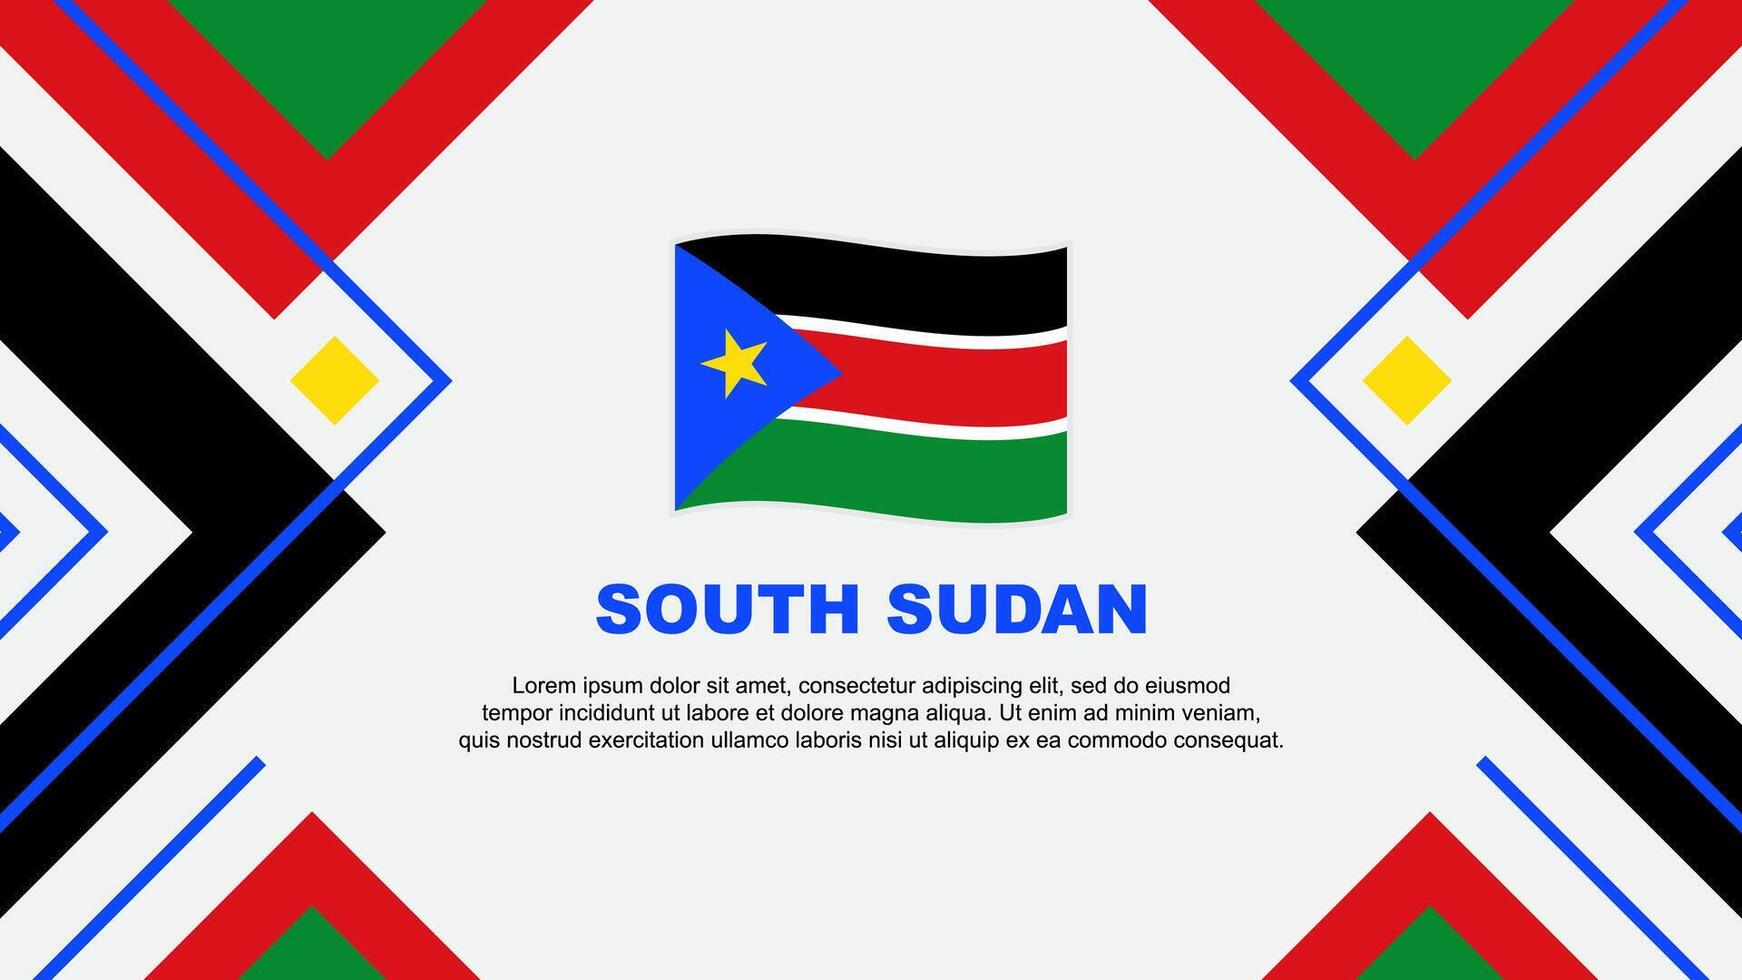 South Sudan Flag Abstract Background Design Template. South Sudan Independence Day Banner Wallpaper Vector Illustration. South Sudan Illustration